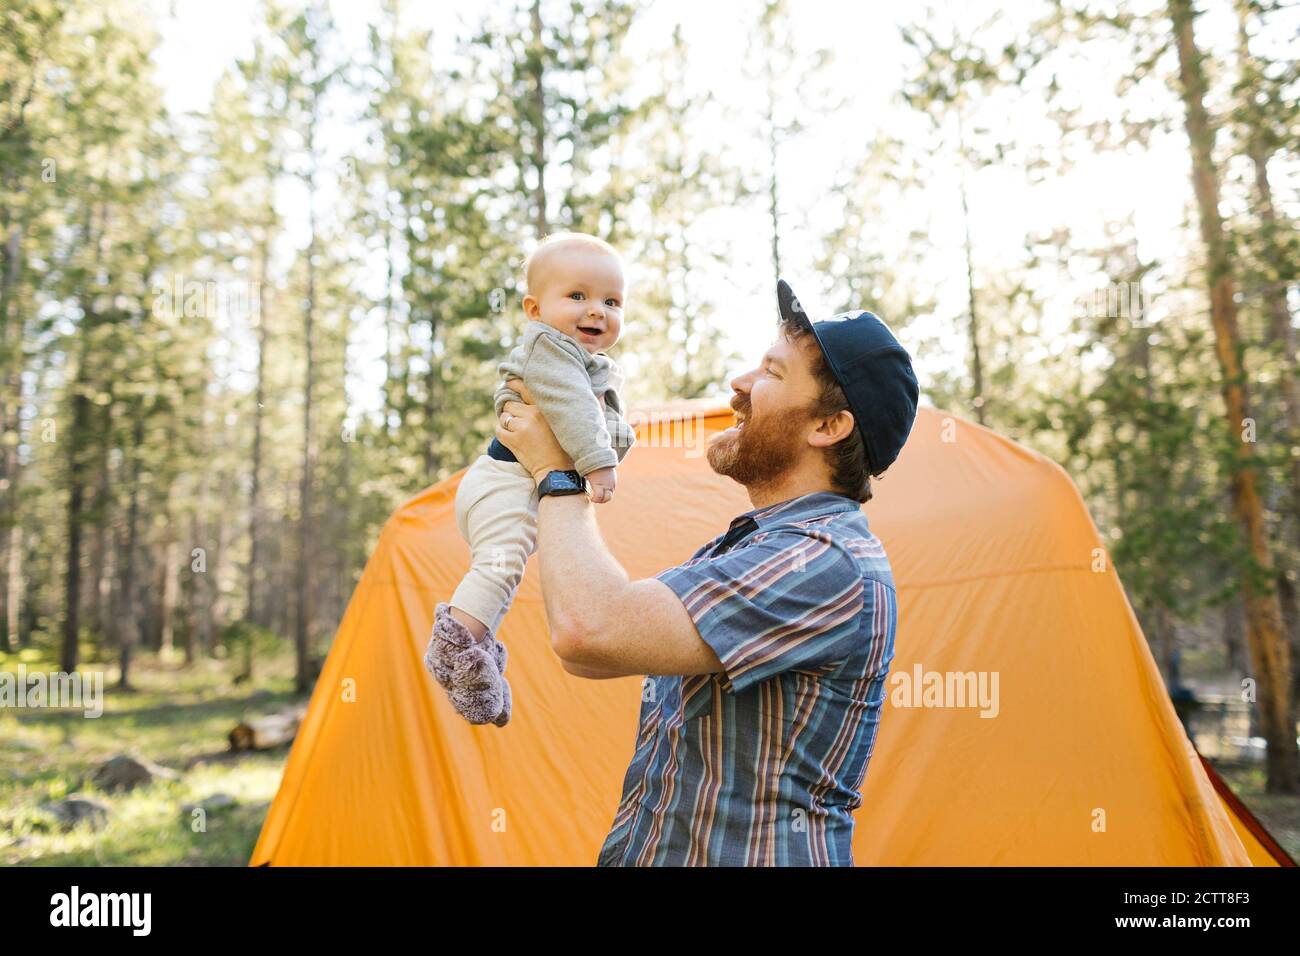 Father lifting baby boy(6-11 months) by tent in Uinta-Wasatch-Cache National Forest Stock Photo